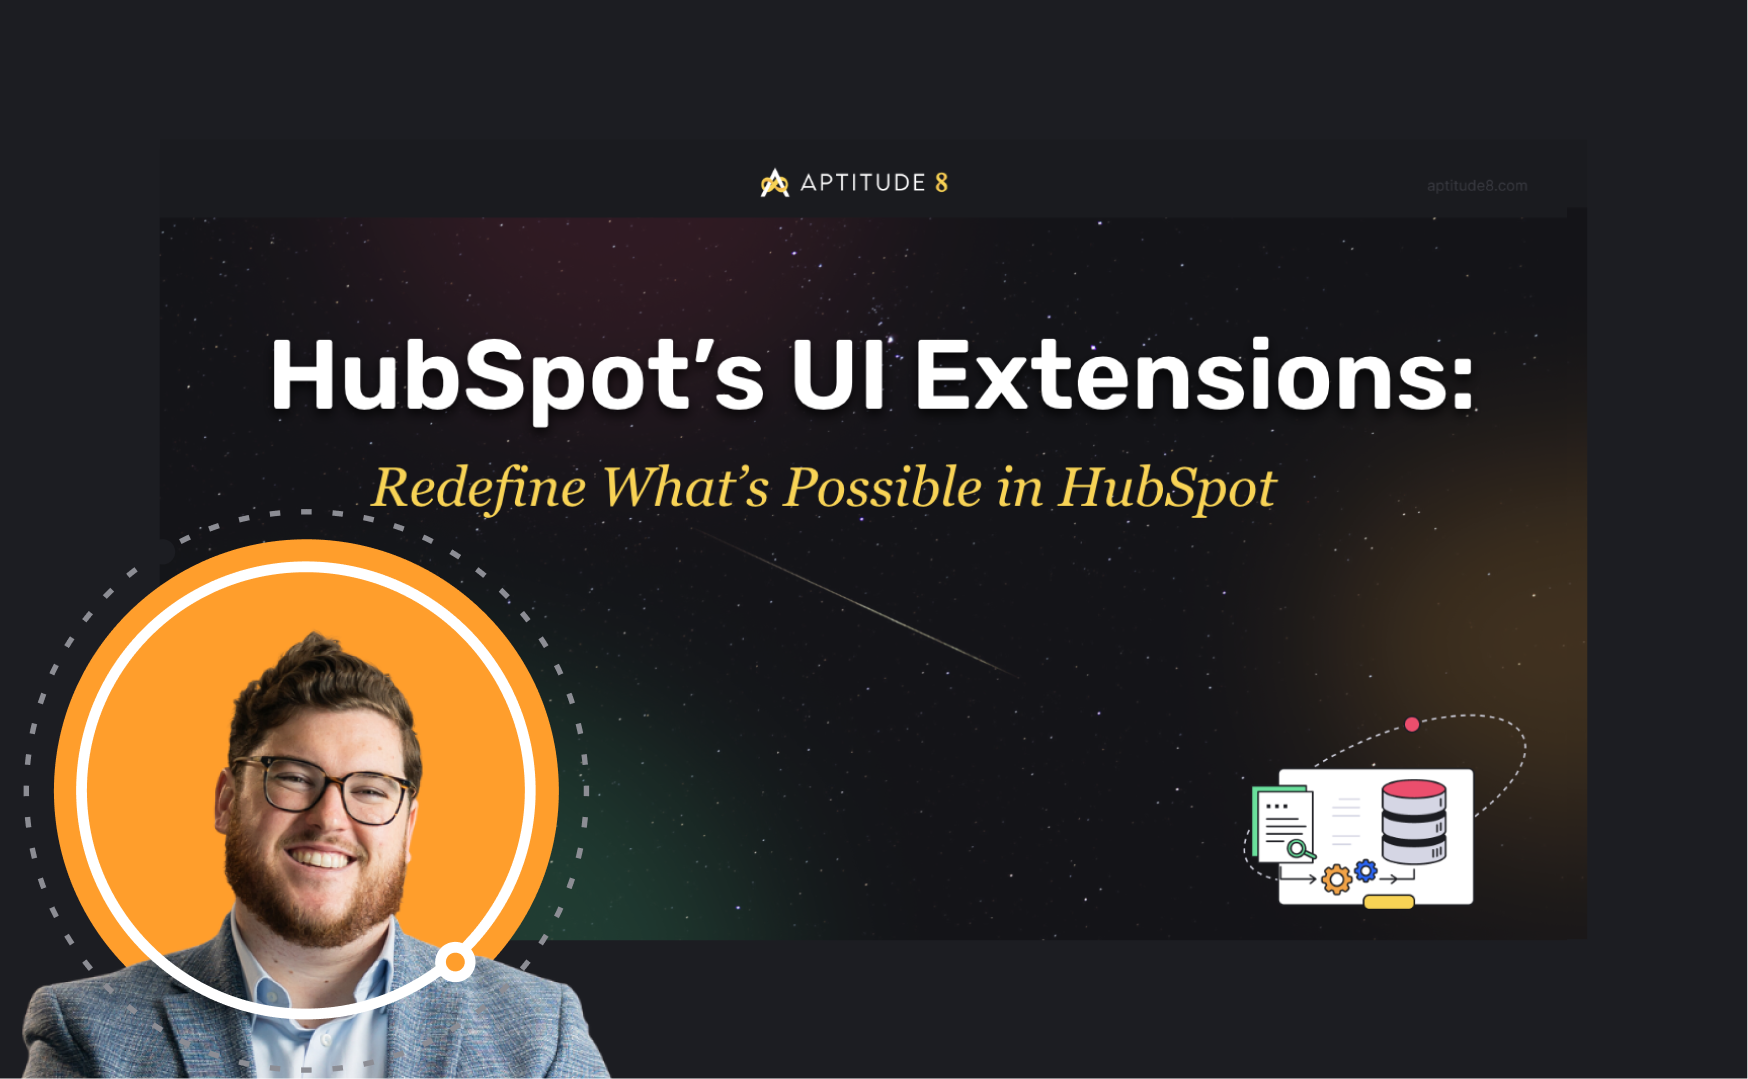 HubSpot's UI Extensions: Redefine What's Possible in HubSpot